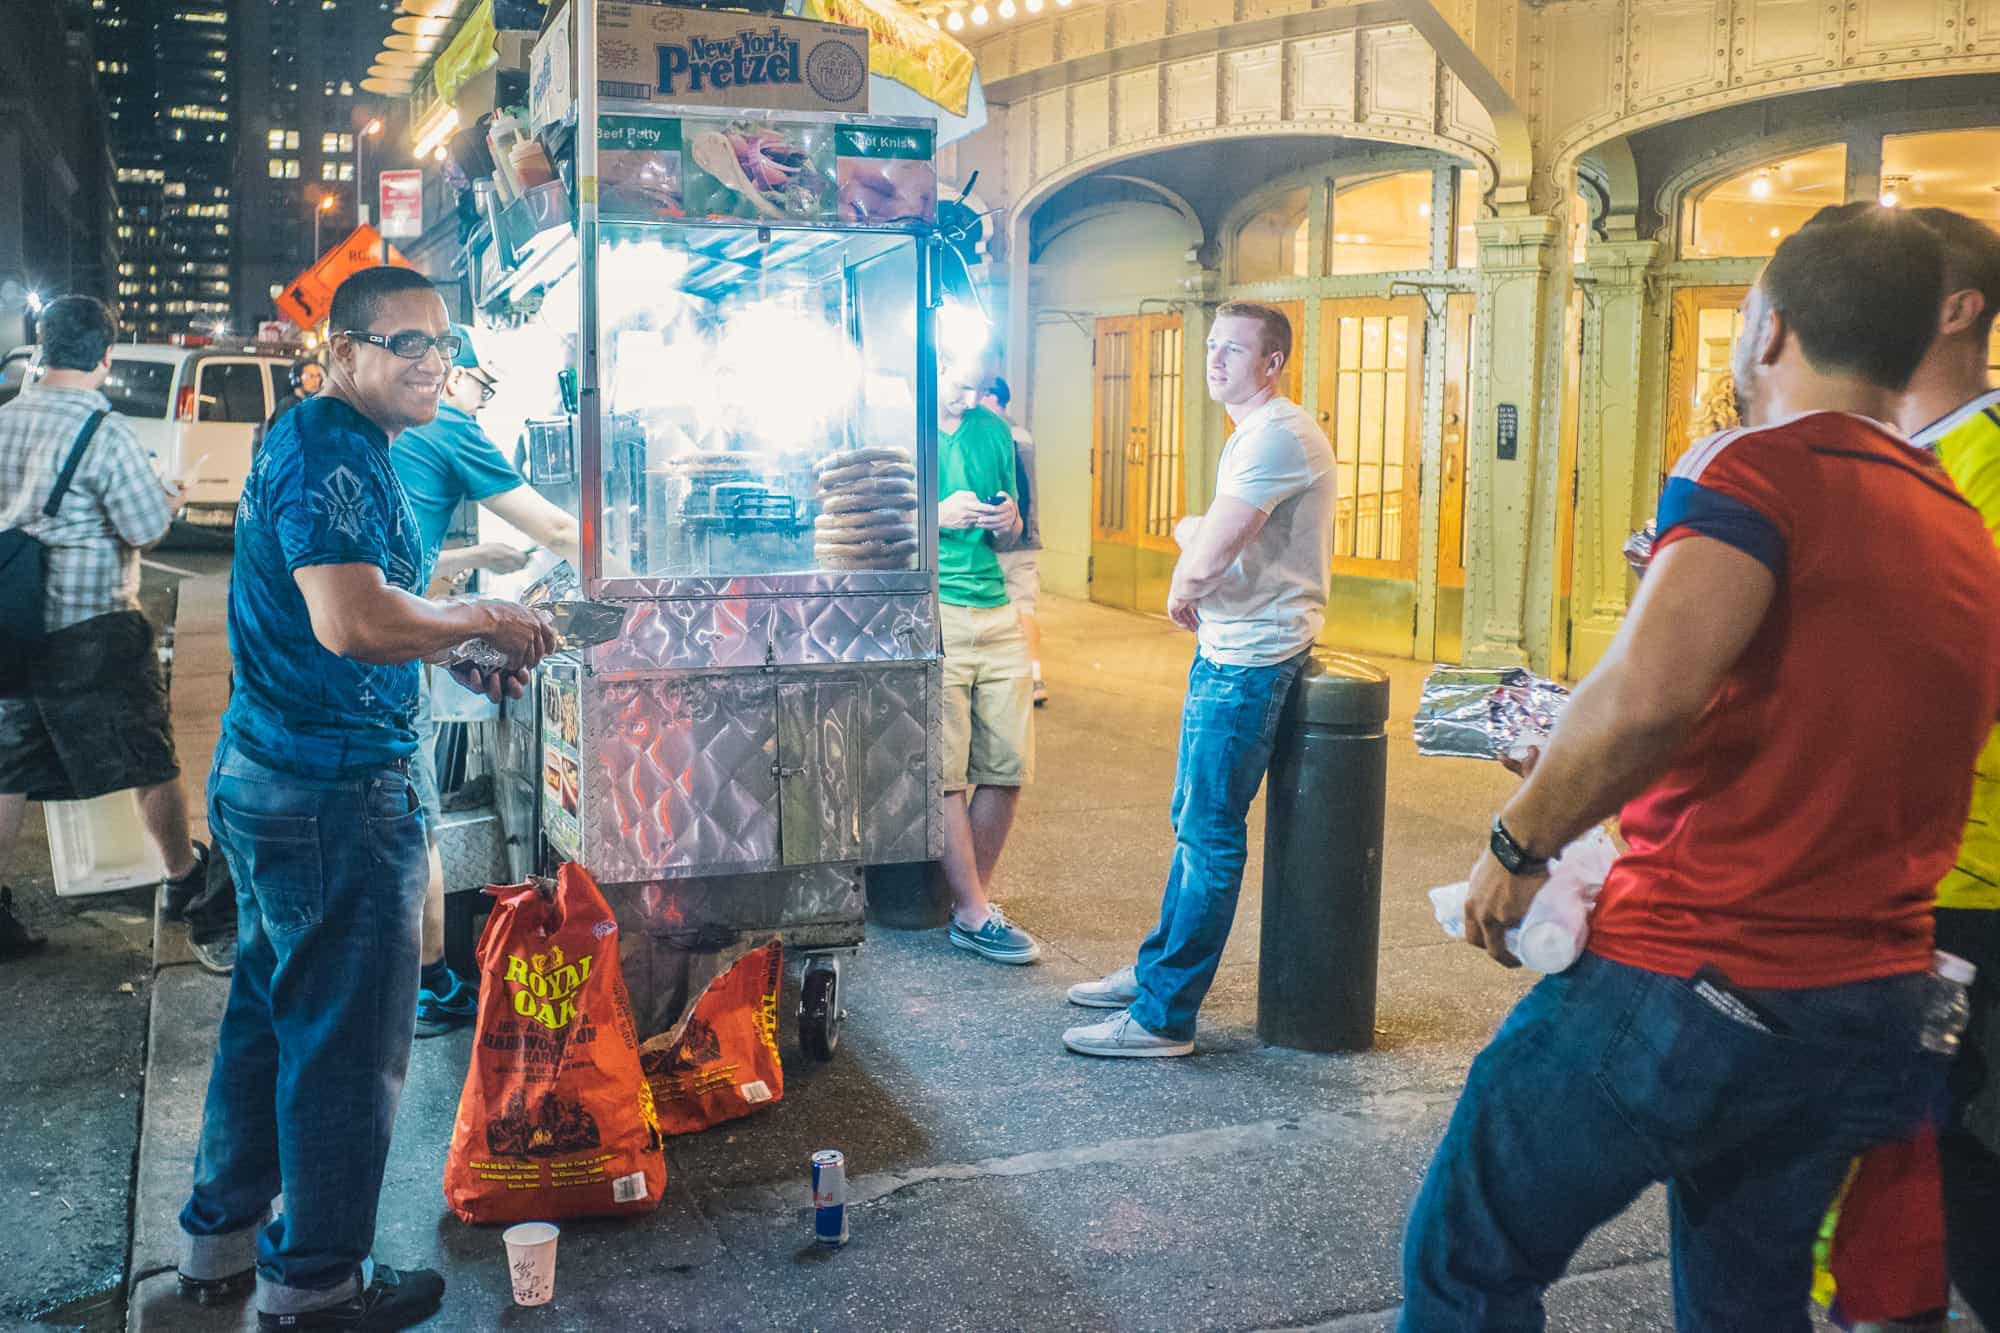 In New York City a group of guys hang out at a food cart for midnight grub after an evening on the sauce, no doubt.